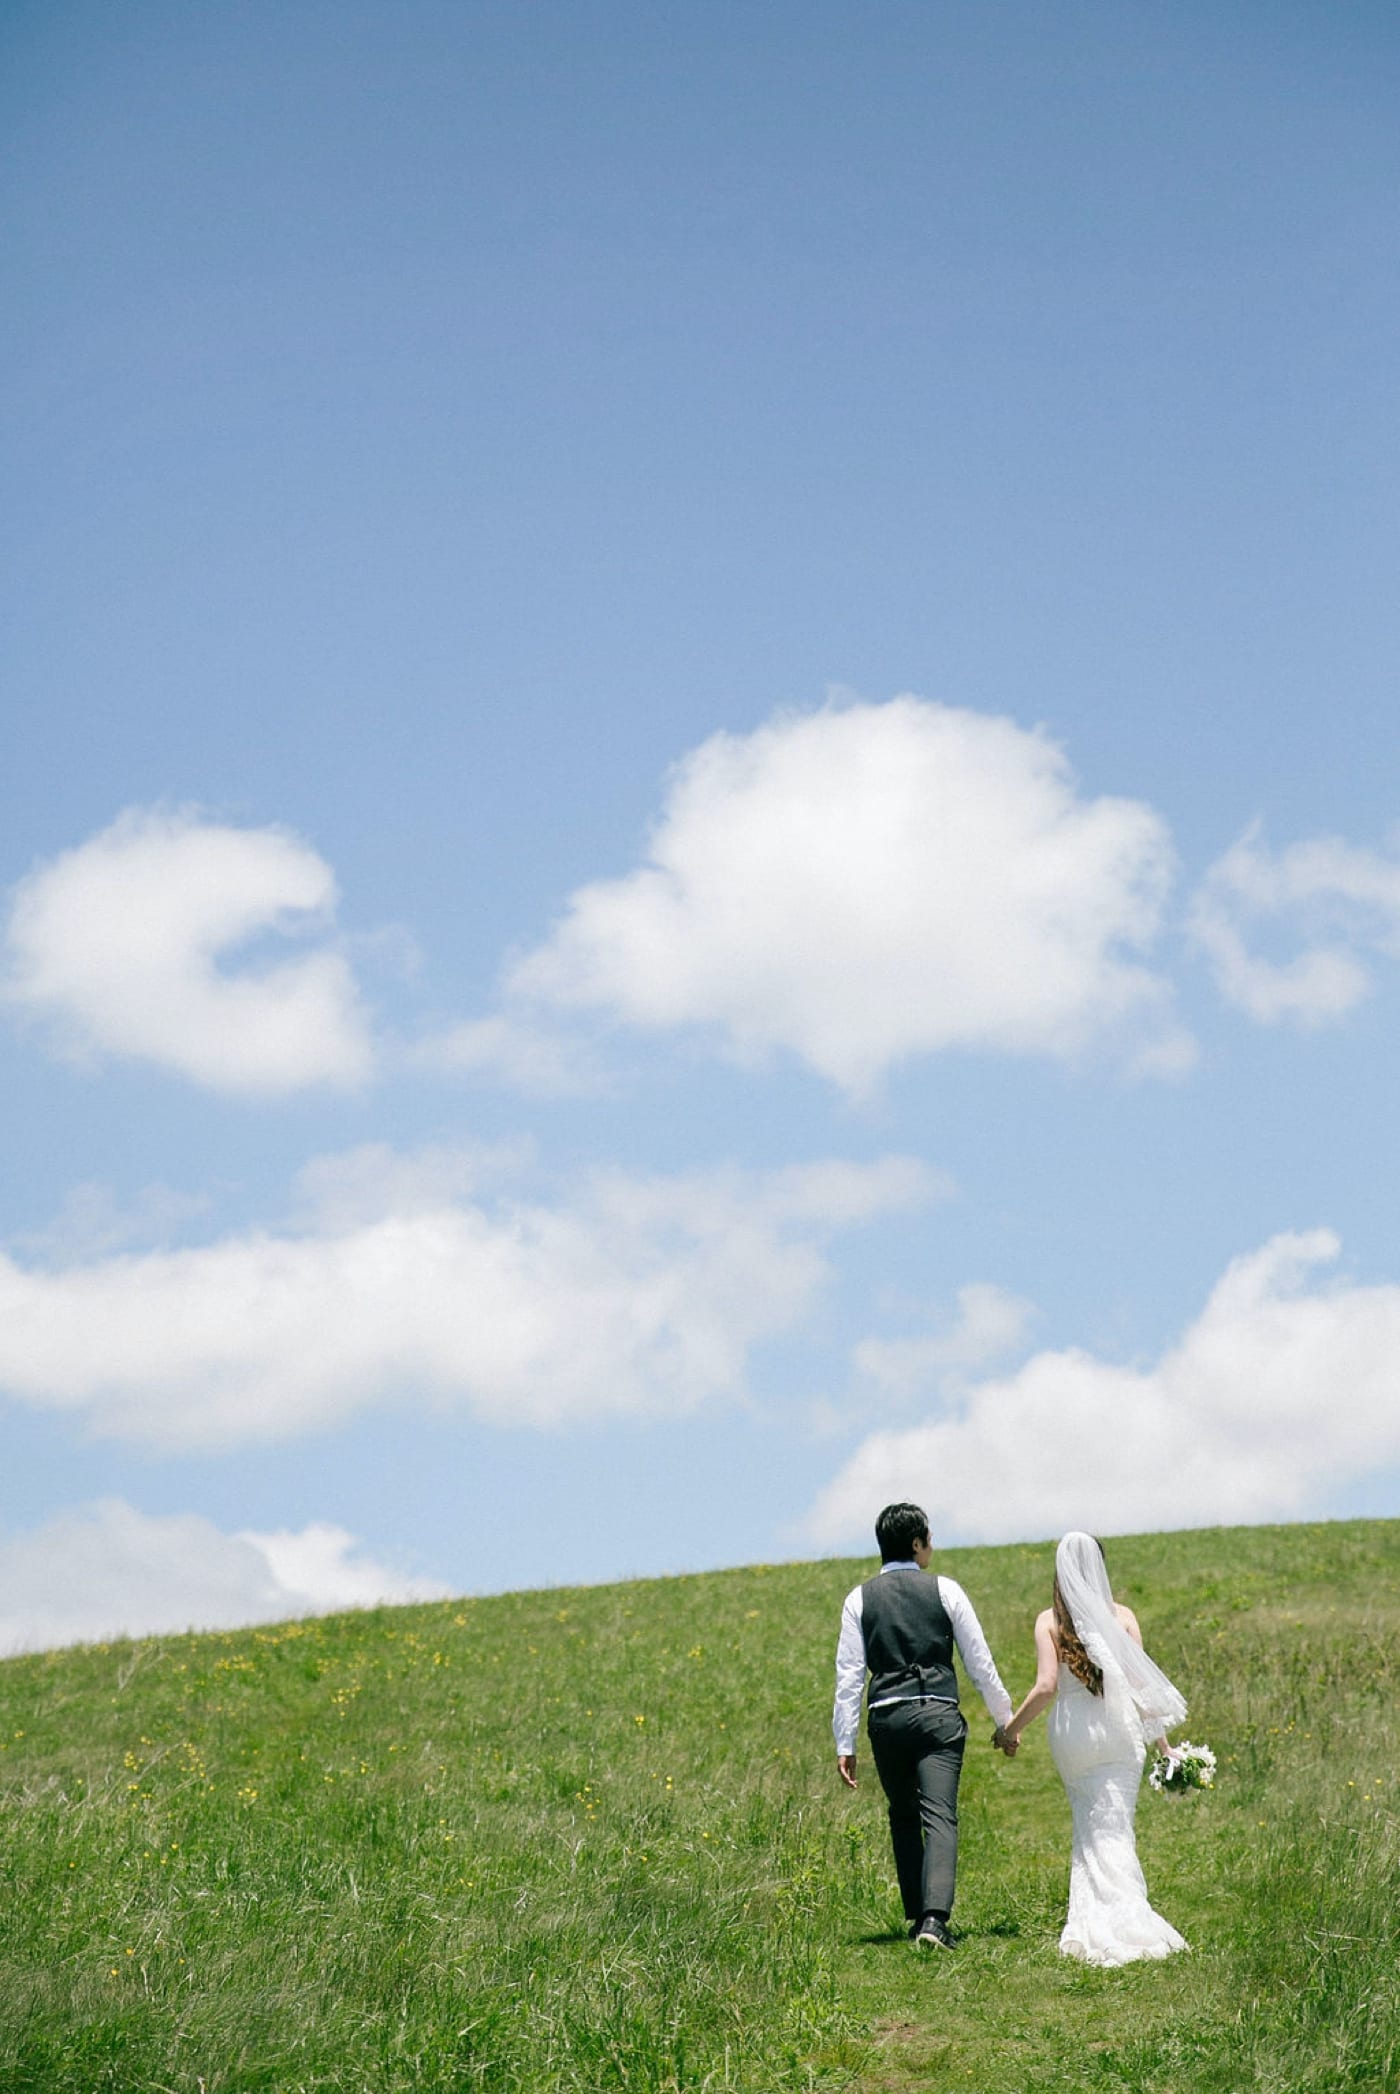 Walking on Max Patch with a Bride and Groom